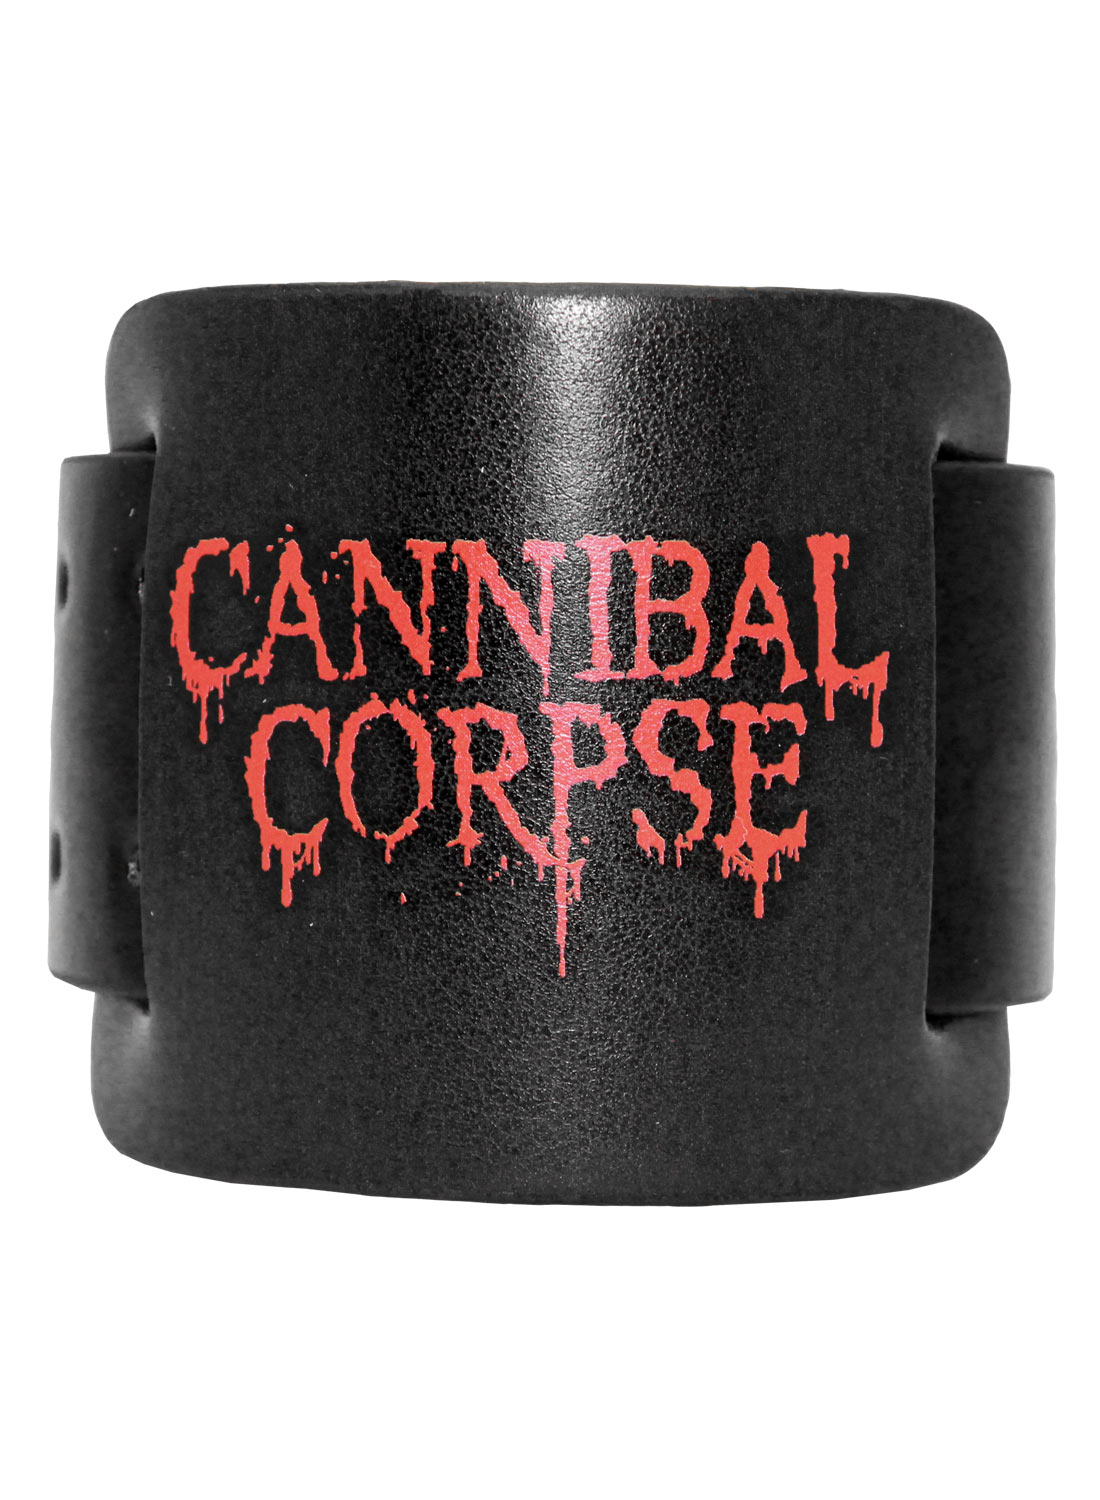 Cannibal Corpse Leather Wristband